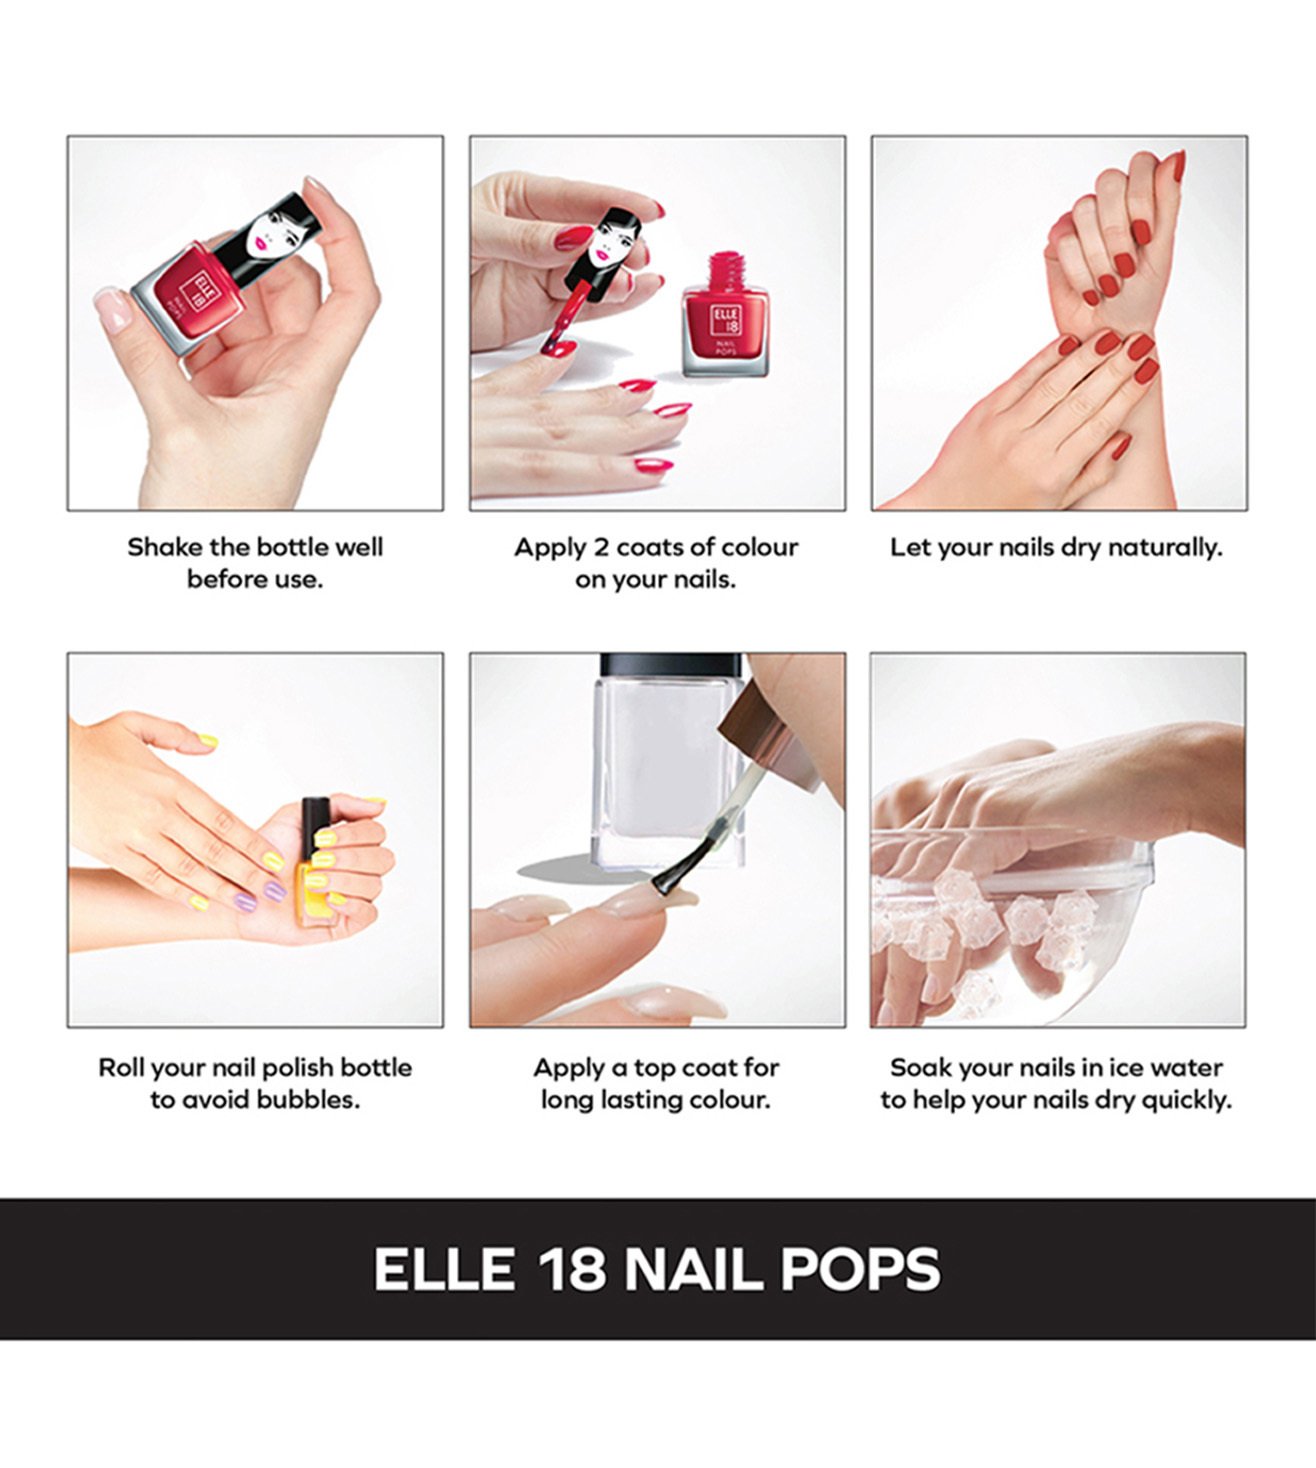 ELLE 18 Nail Pops Nail Color 163 163 - Price in India, Buy ELLE 18 Nail  Pops Nail Color 163 163 Online In India, Reviews, Ratings & Features |  Flipkart.com